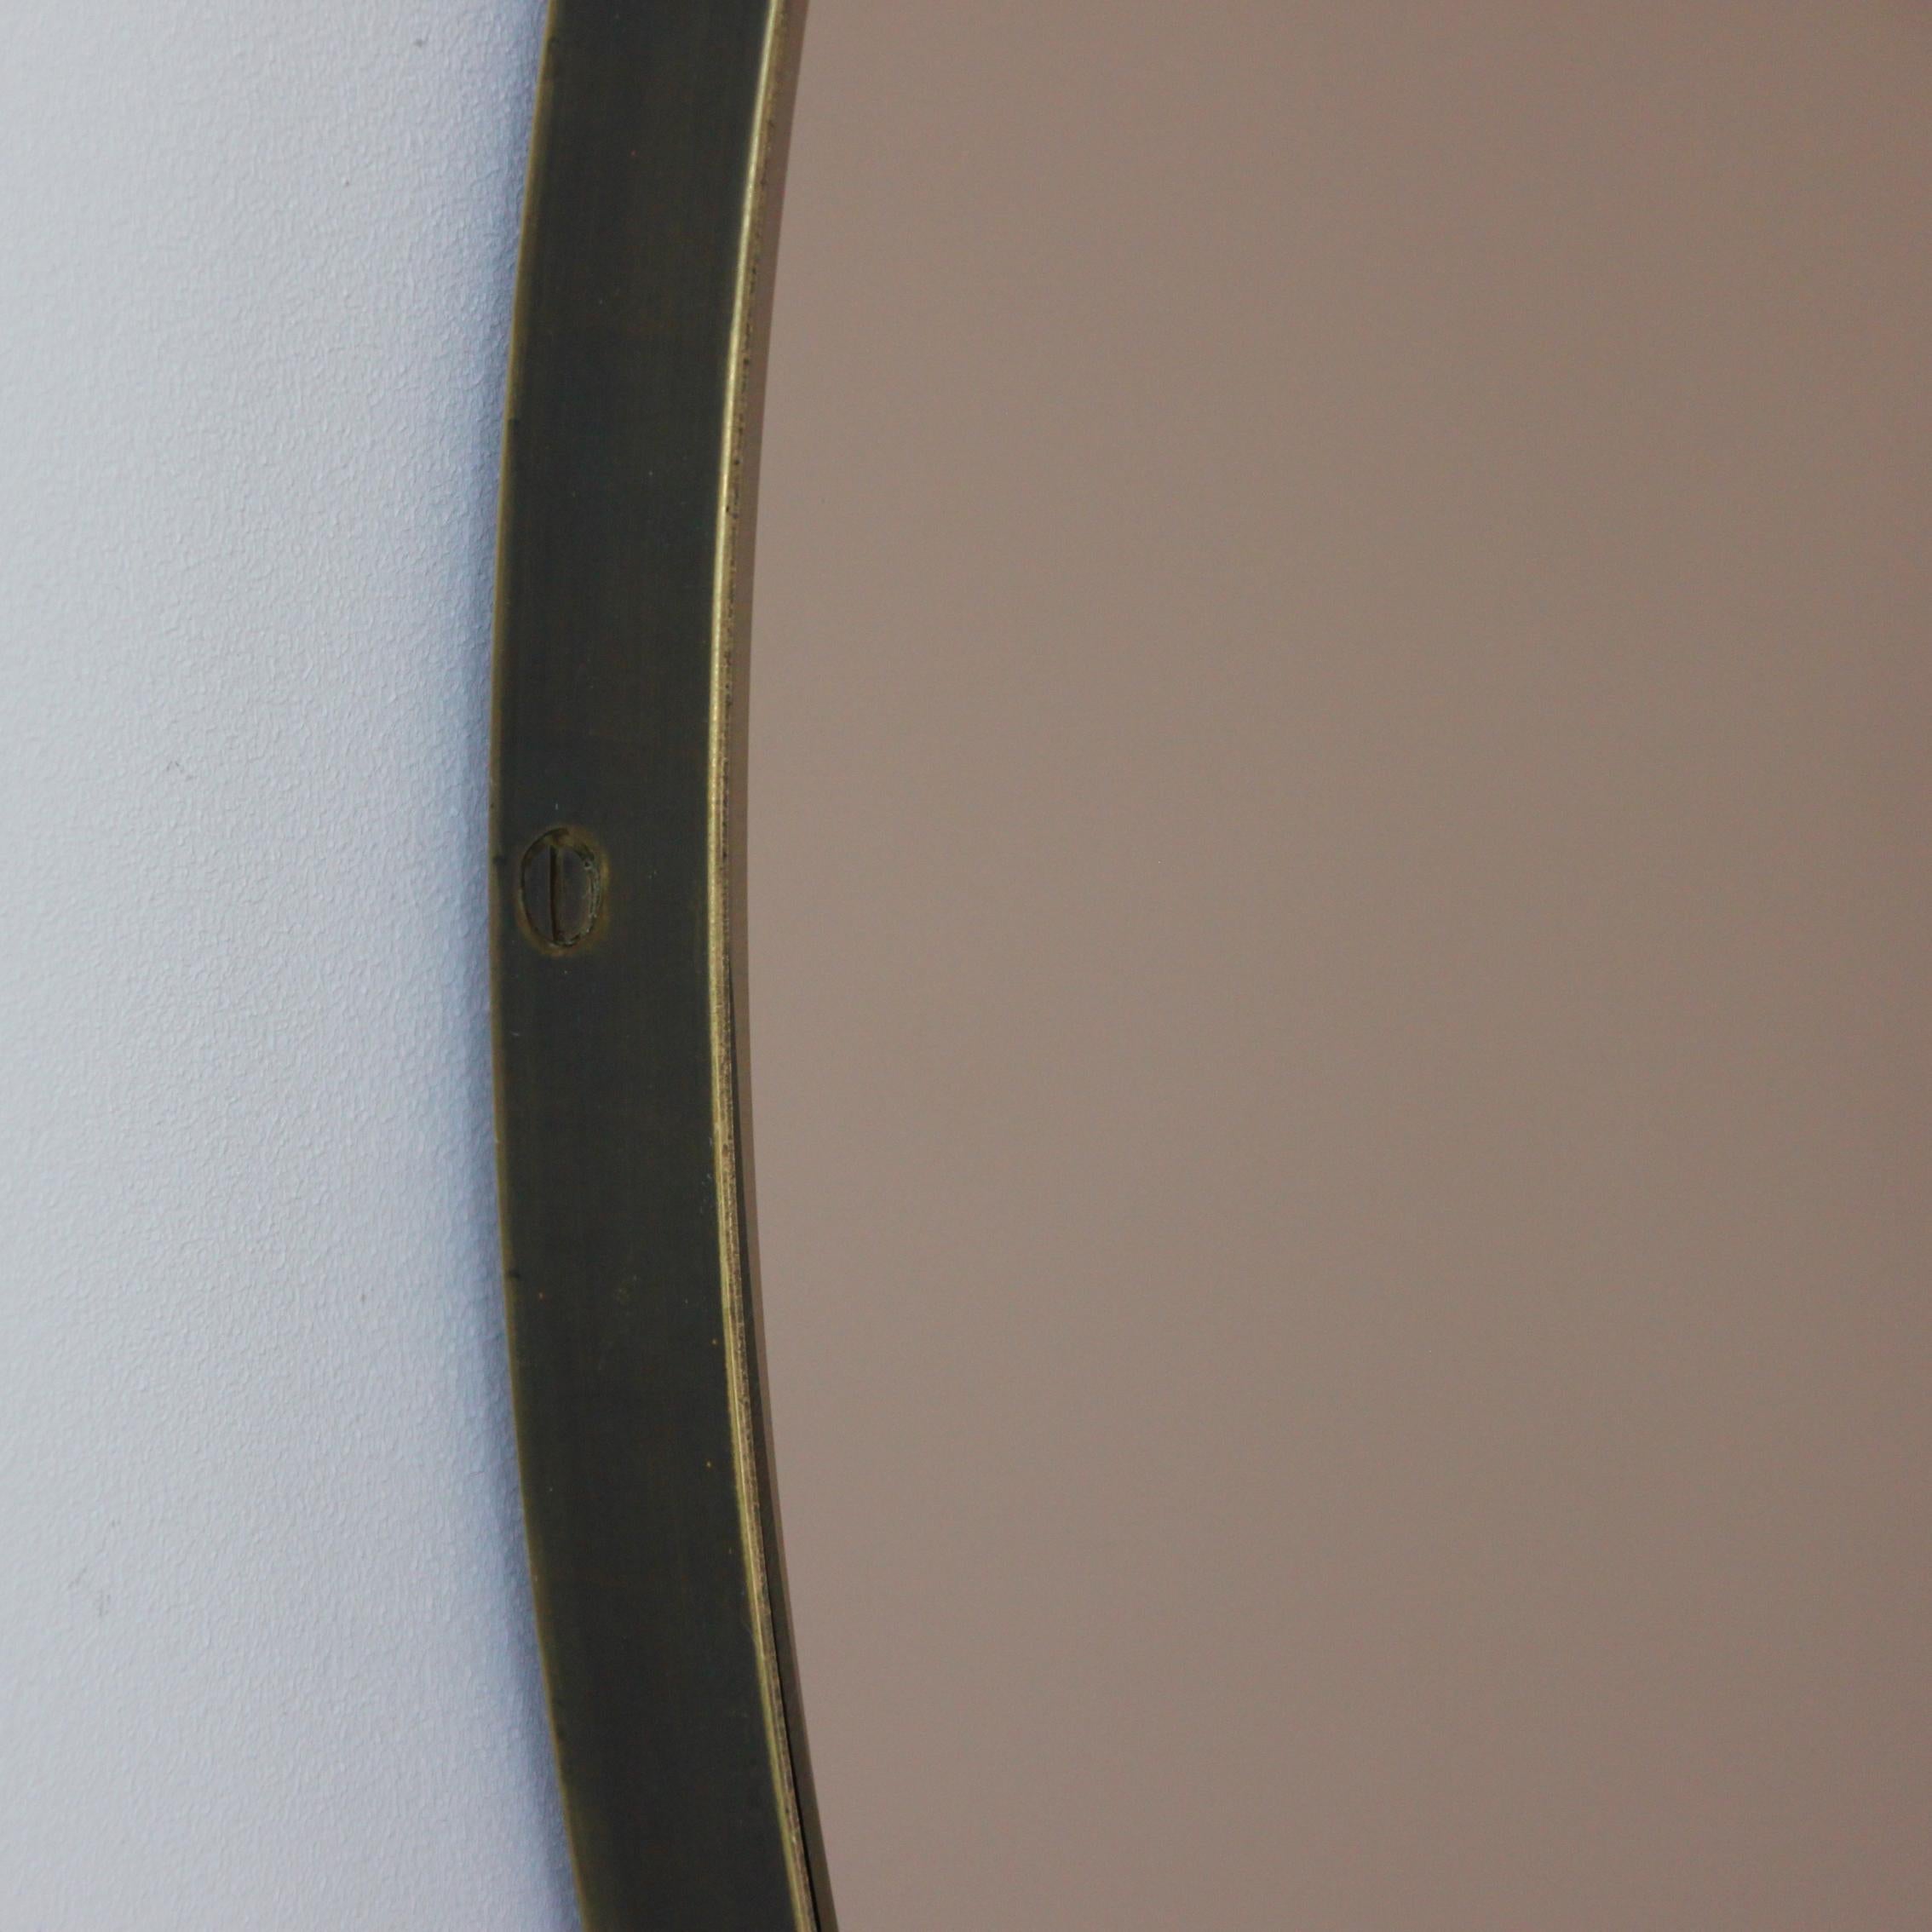 Contemporary bronze tinted Orbis™ round mirror with a minimalist solid brass frame with a bronze patina finish. Designed and made in London, UK.

Our mirrors are designed with an integrated French cleat (split batten) system that ensures the mirror